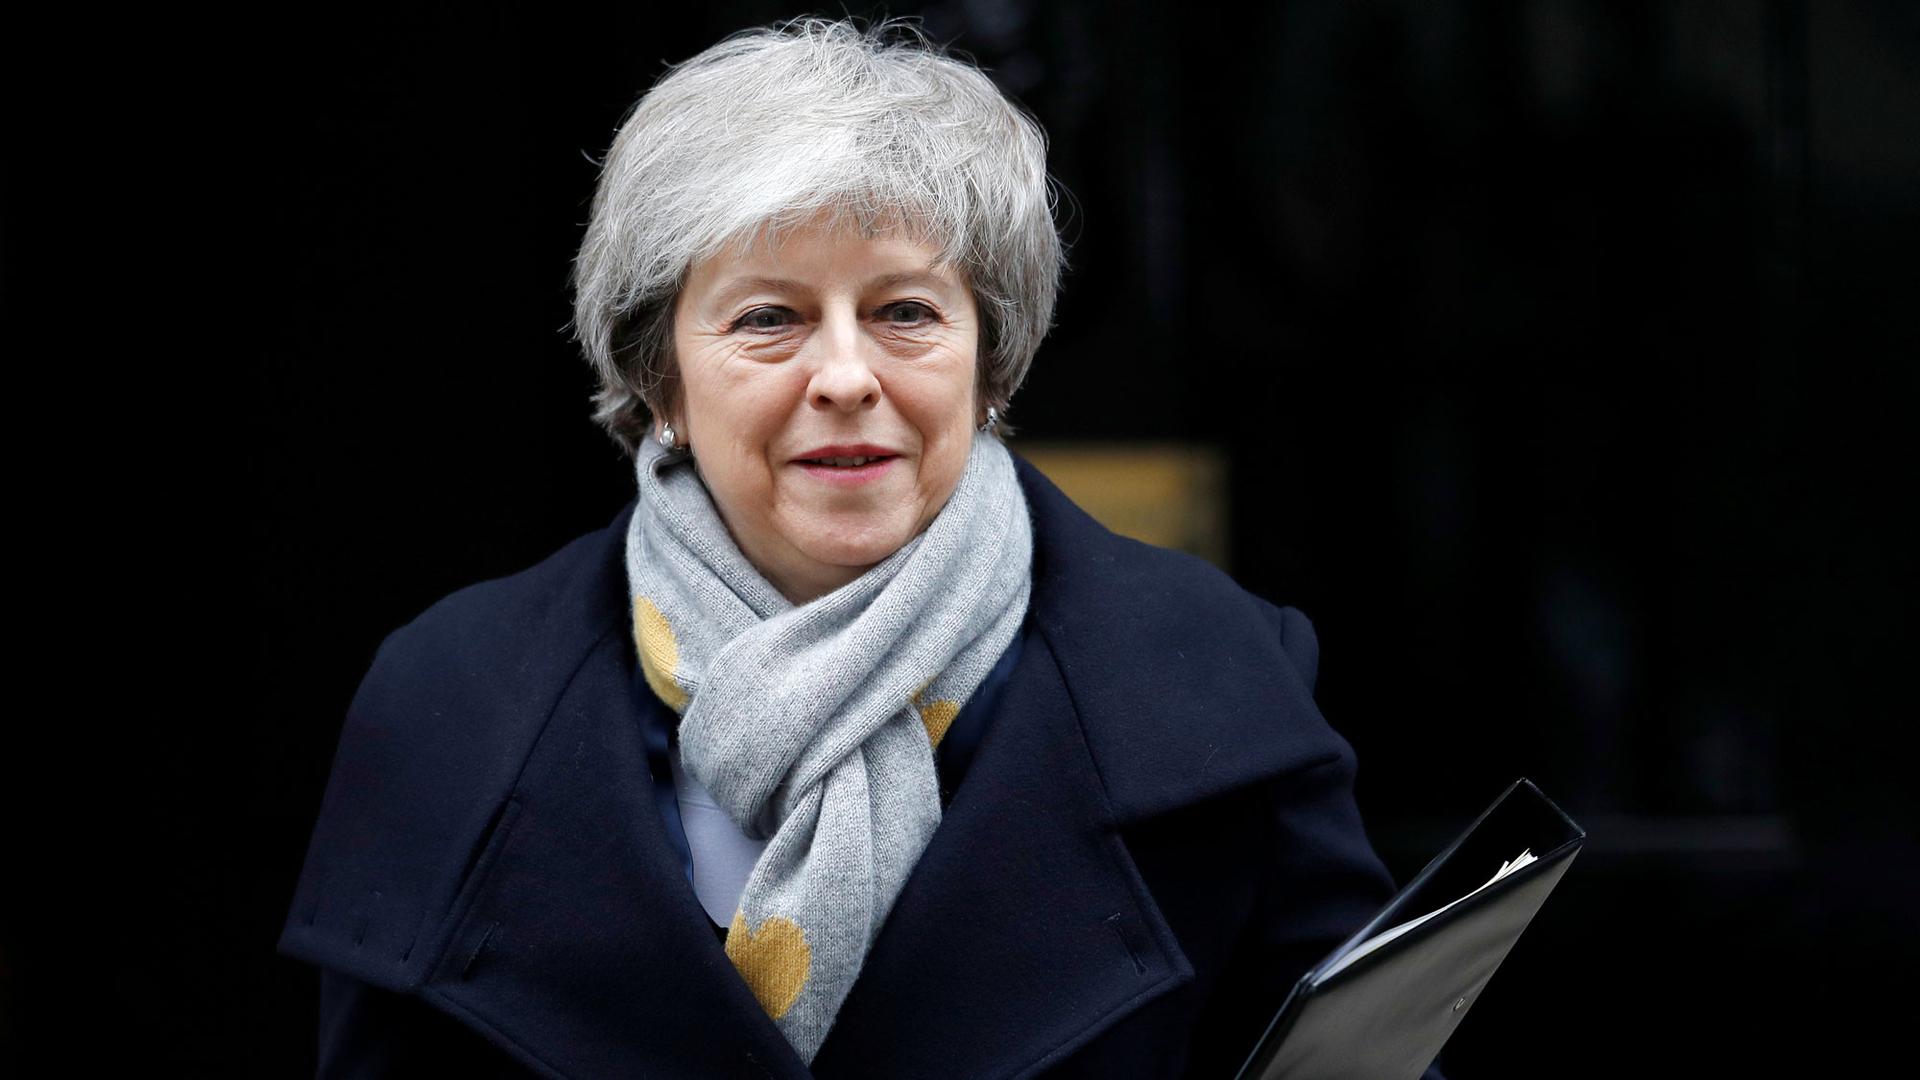 Britain's Prime Minister Theresa May is shown wearing a grey scarf and blue overcoat with a binder in her left hand.